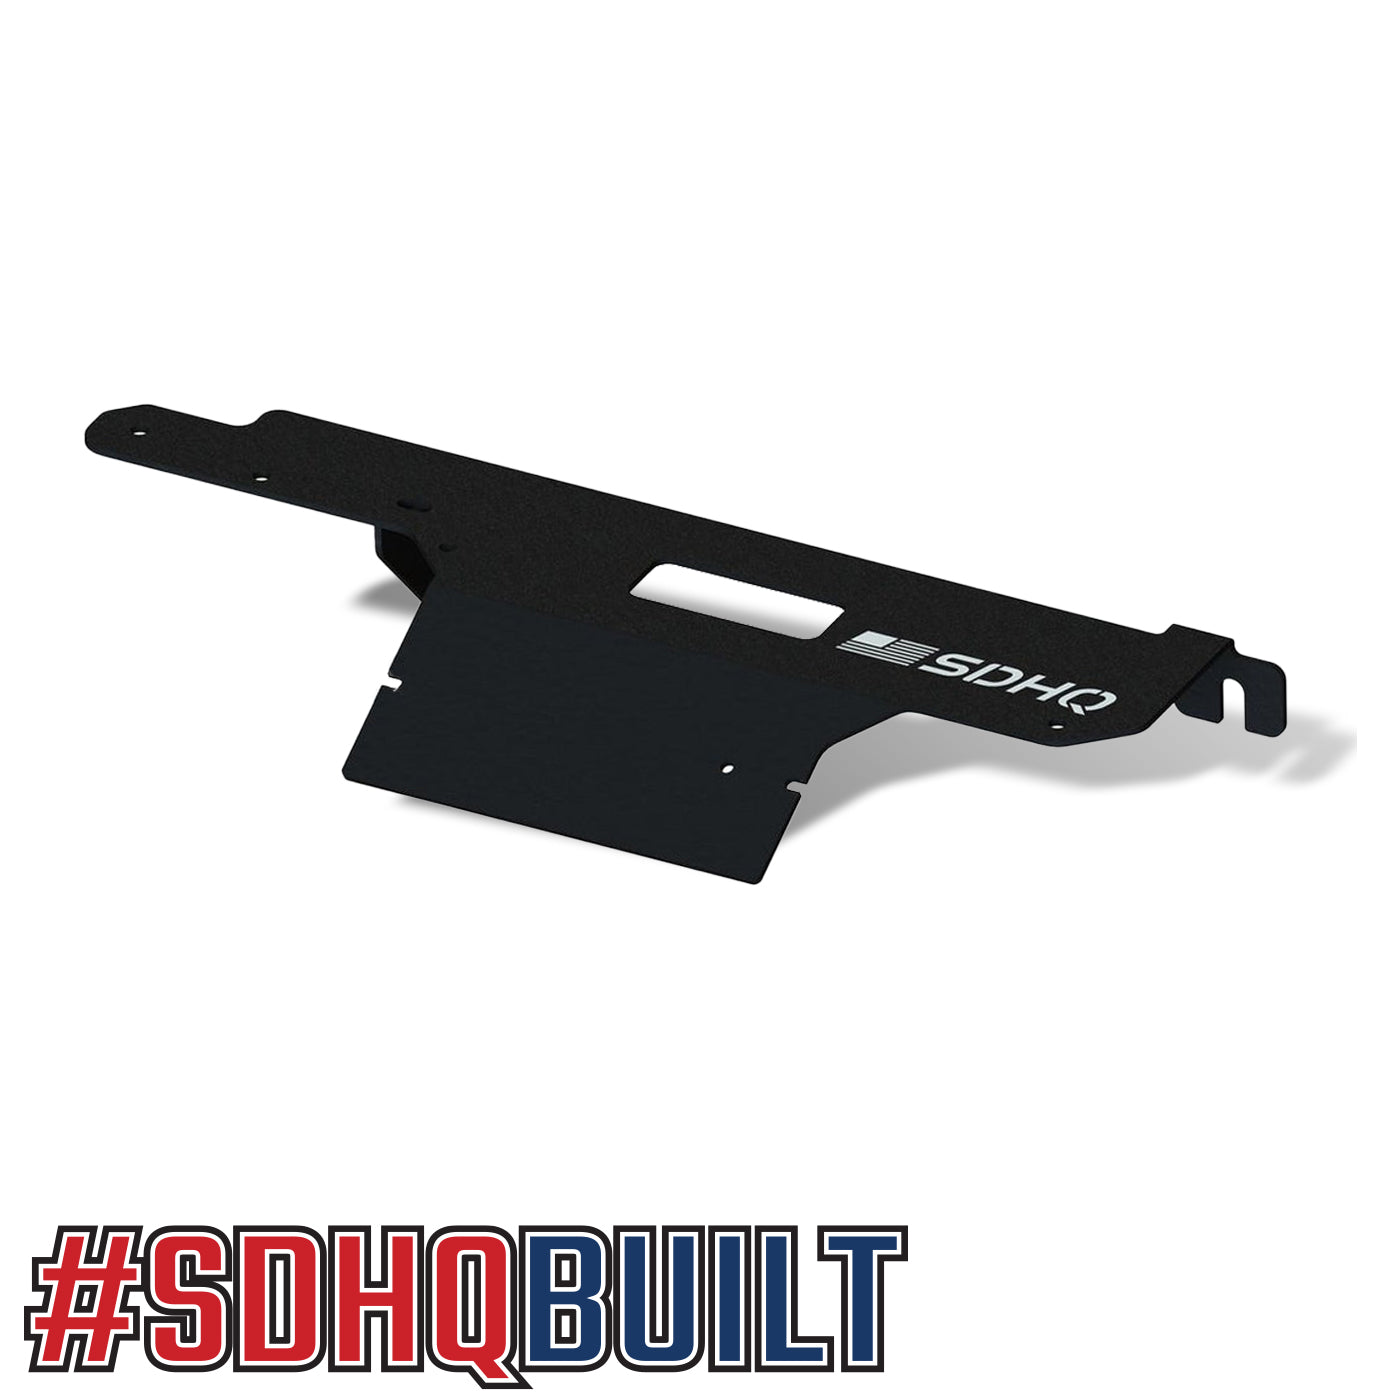 '17-Current Ford Raptor SDHQ Built Switch Pros Power Module Mount